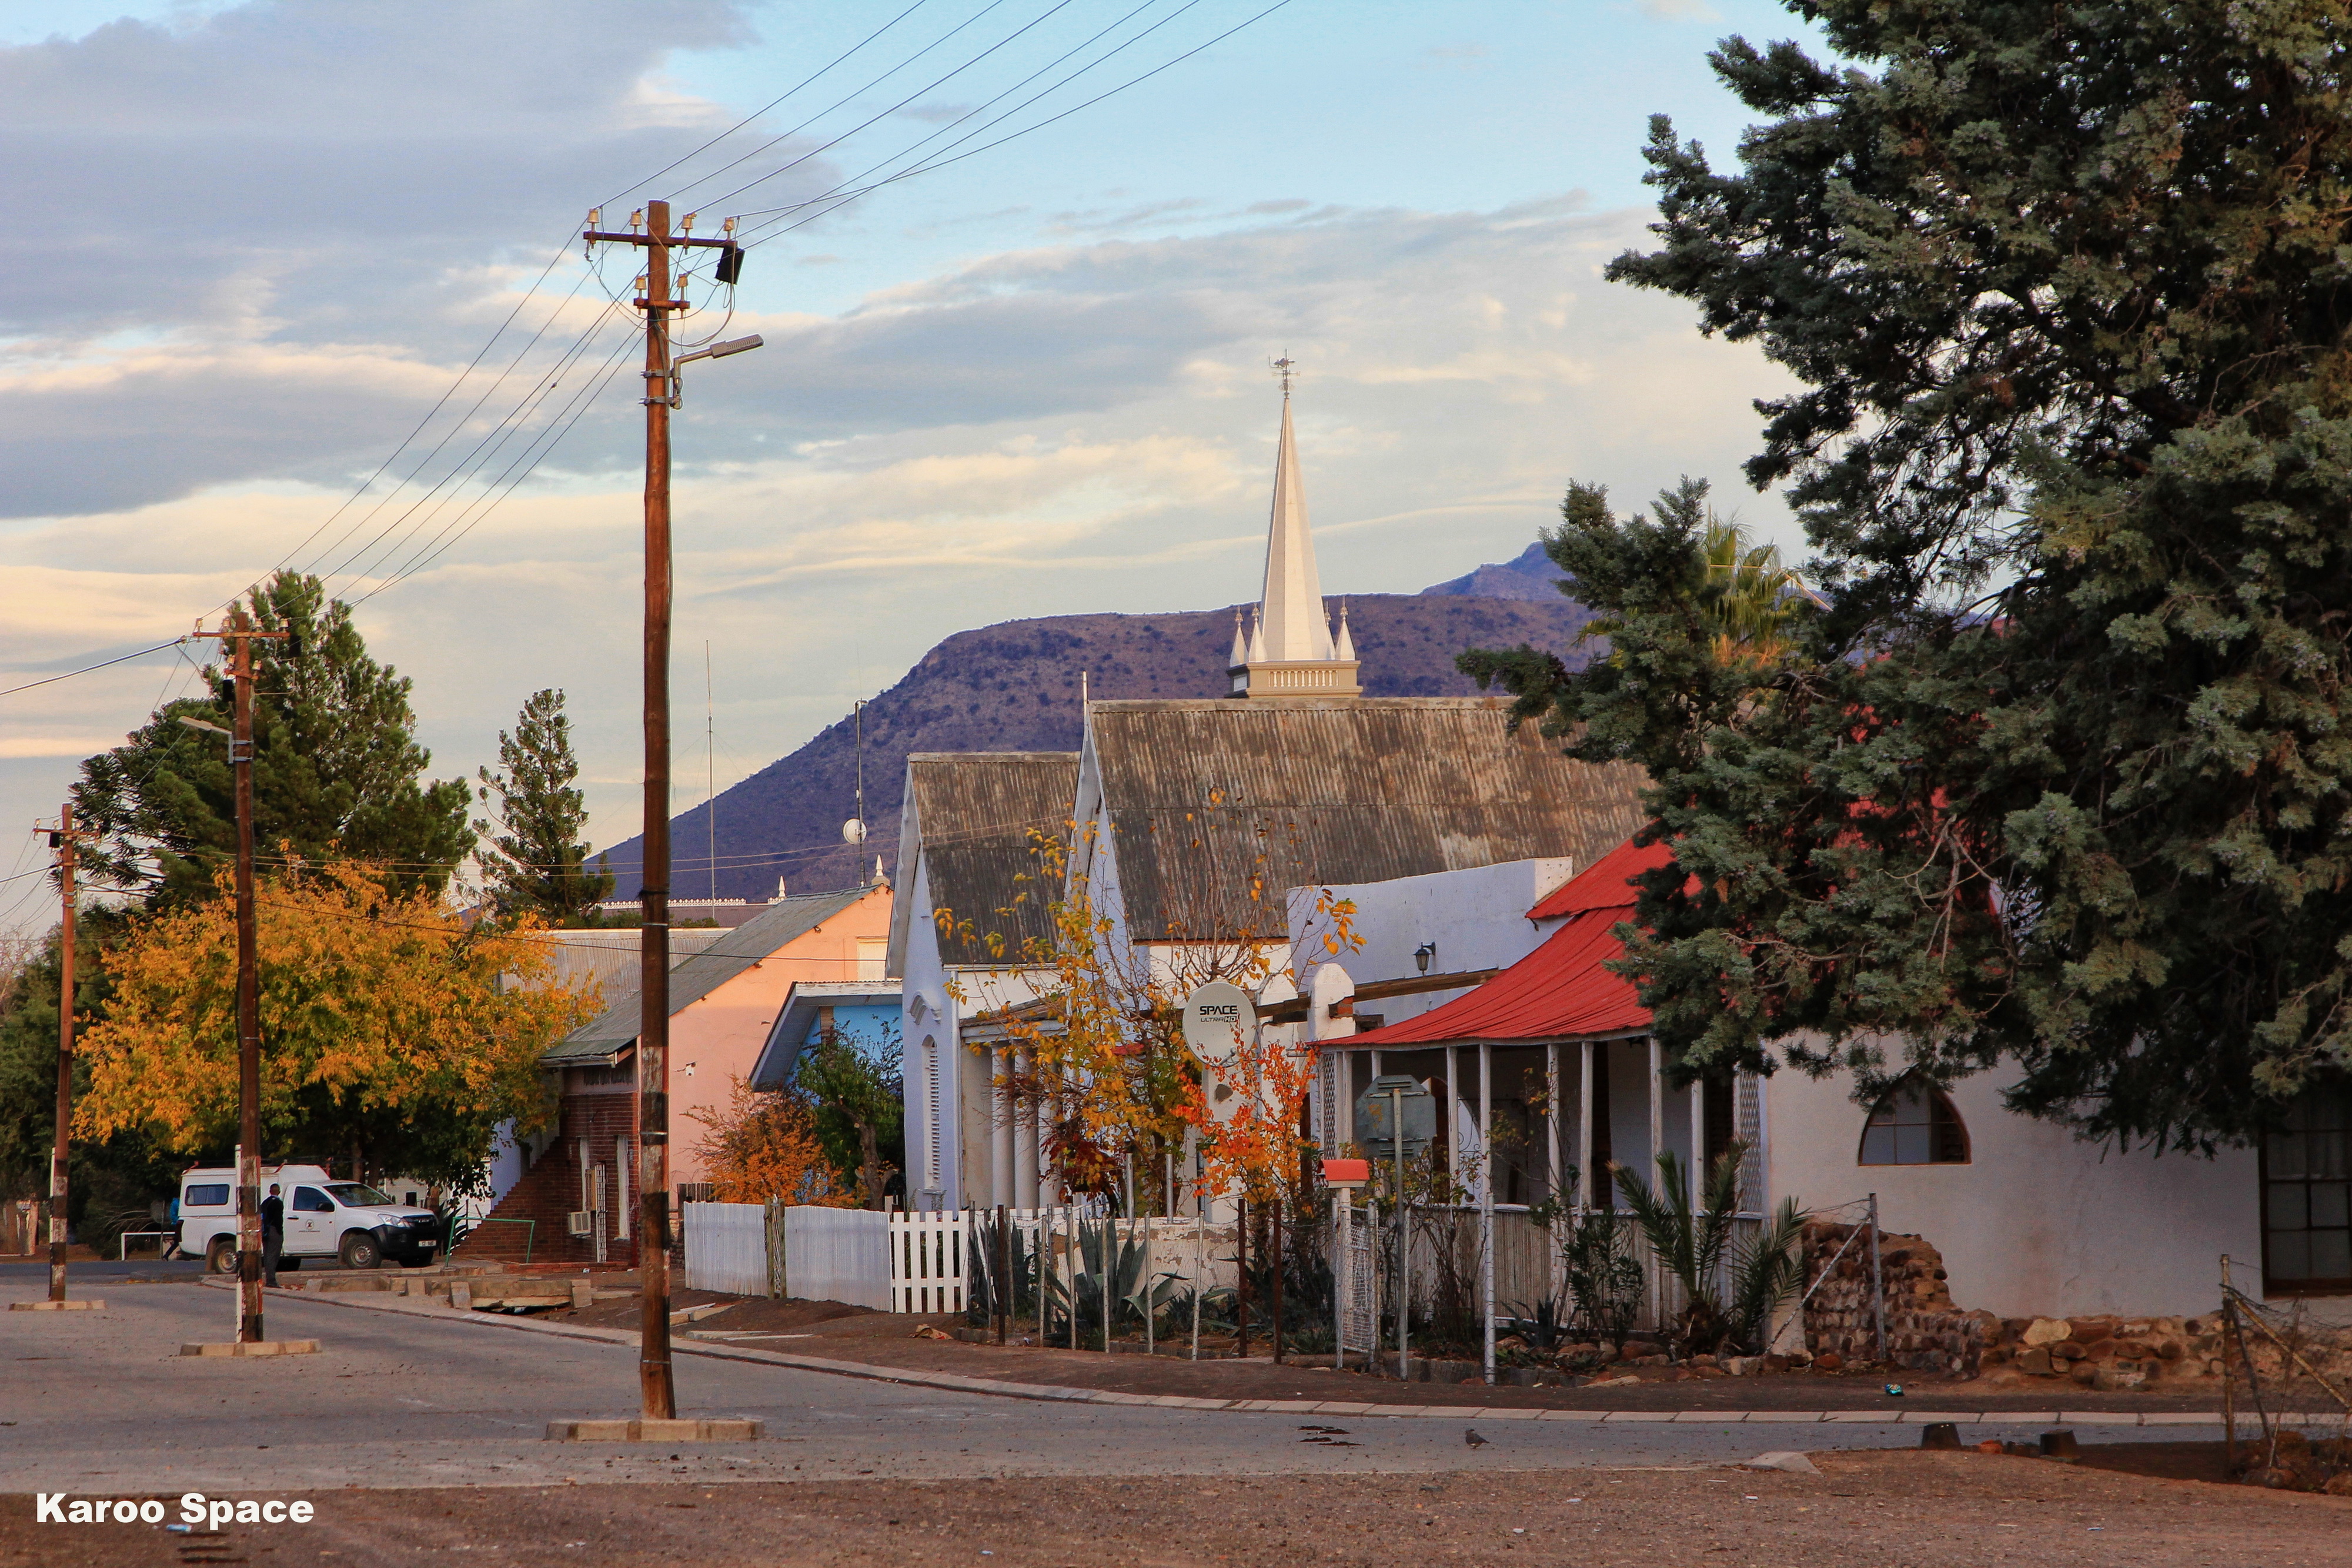 Much of the old Karoo architecture still stands.